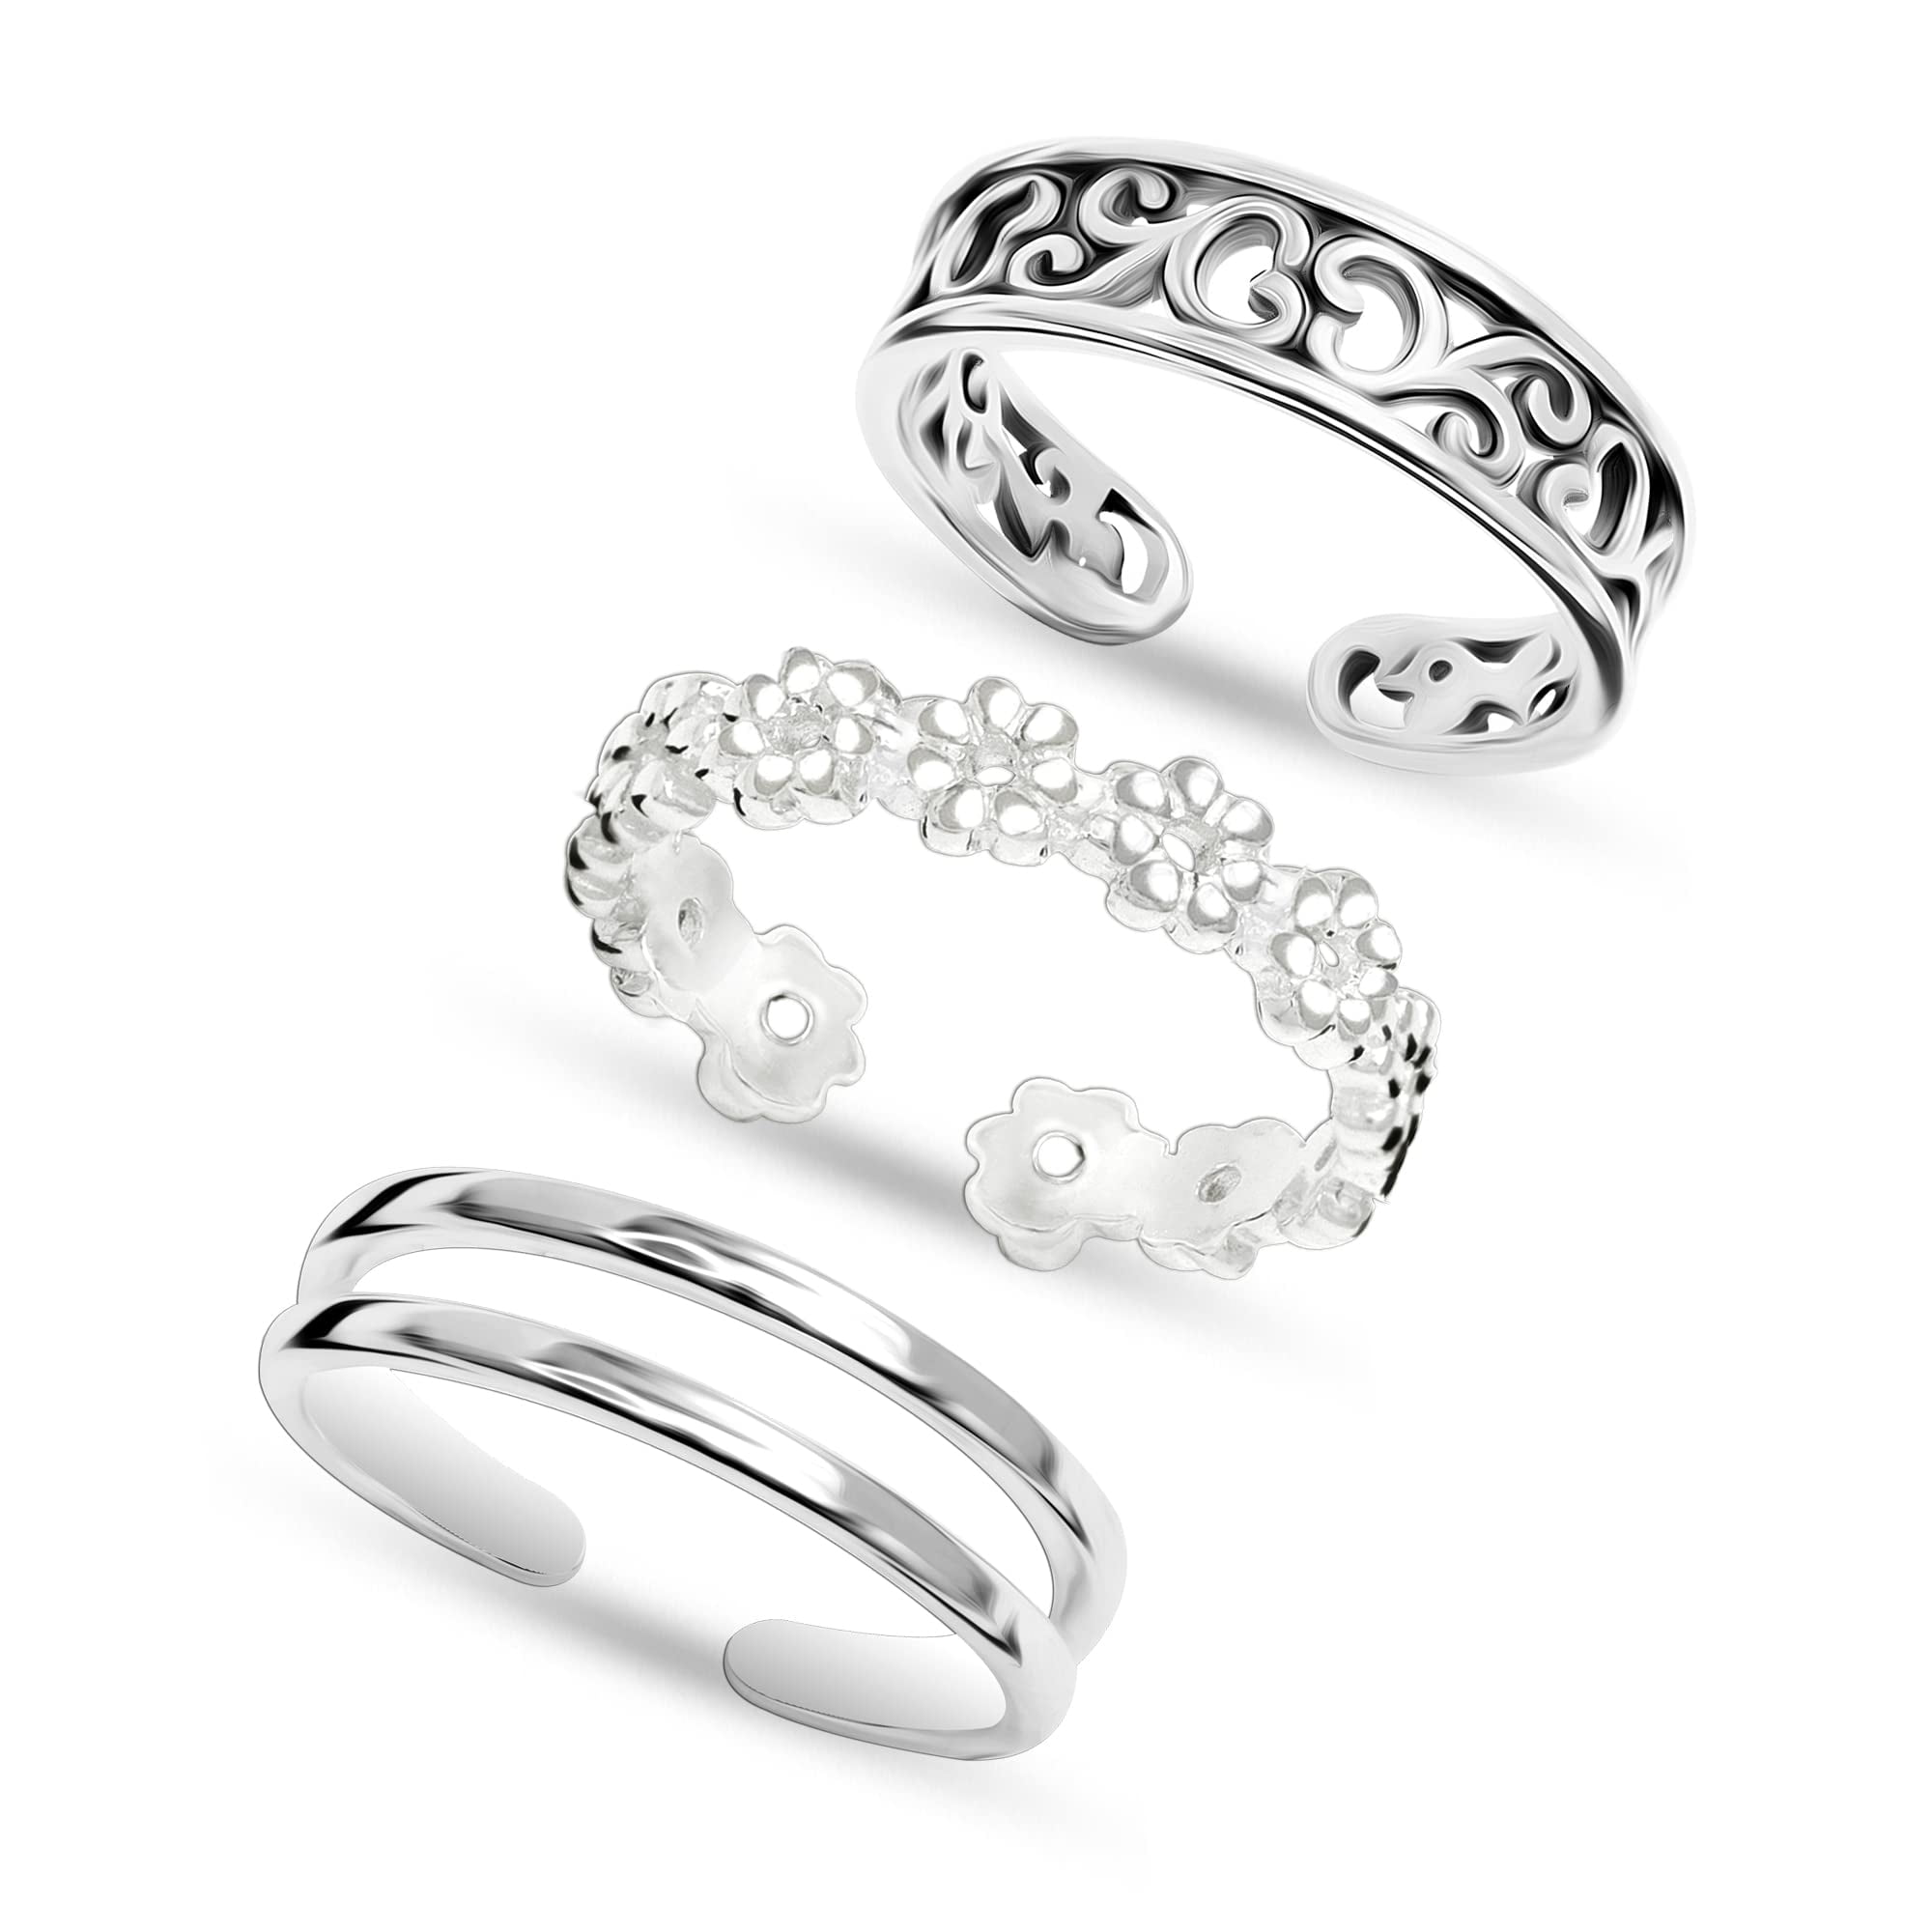 Leaf Pattern Sterling Silver Toe Rings from India - Leafy Texture | NOVICA